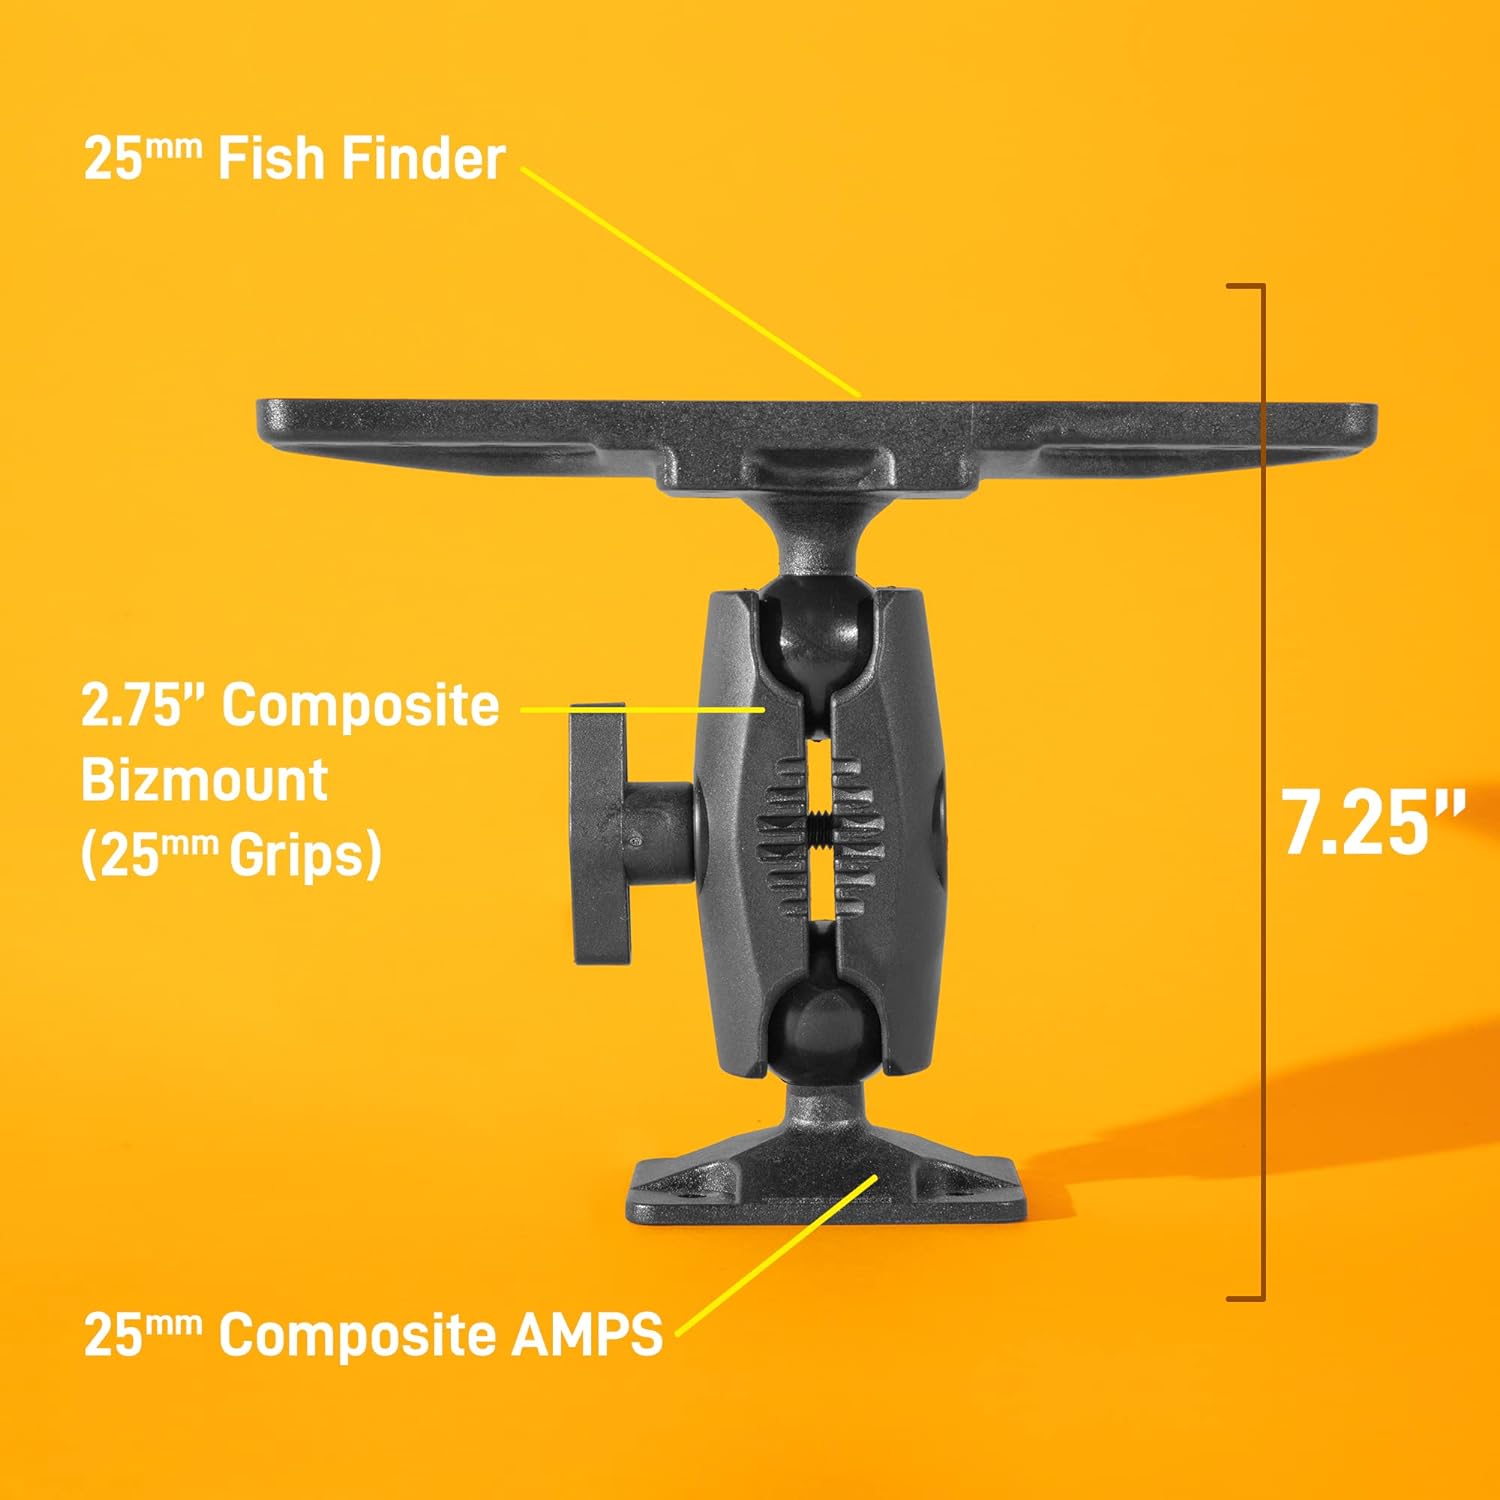 iBOLT 25mm / 1 inch Composite Universal Marine Electronic Fish Finder to Composite Rectangular AMPS Pattern Drill Base Dual Ball Mount- Featuring a 2.75-inch Composite 25mm / 1 inch Bizmount Arm